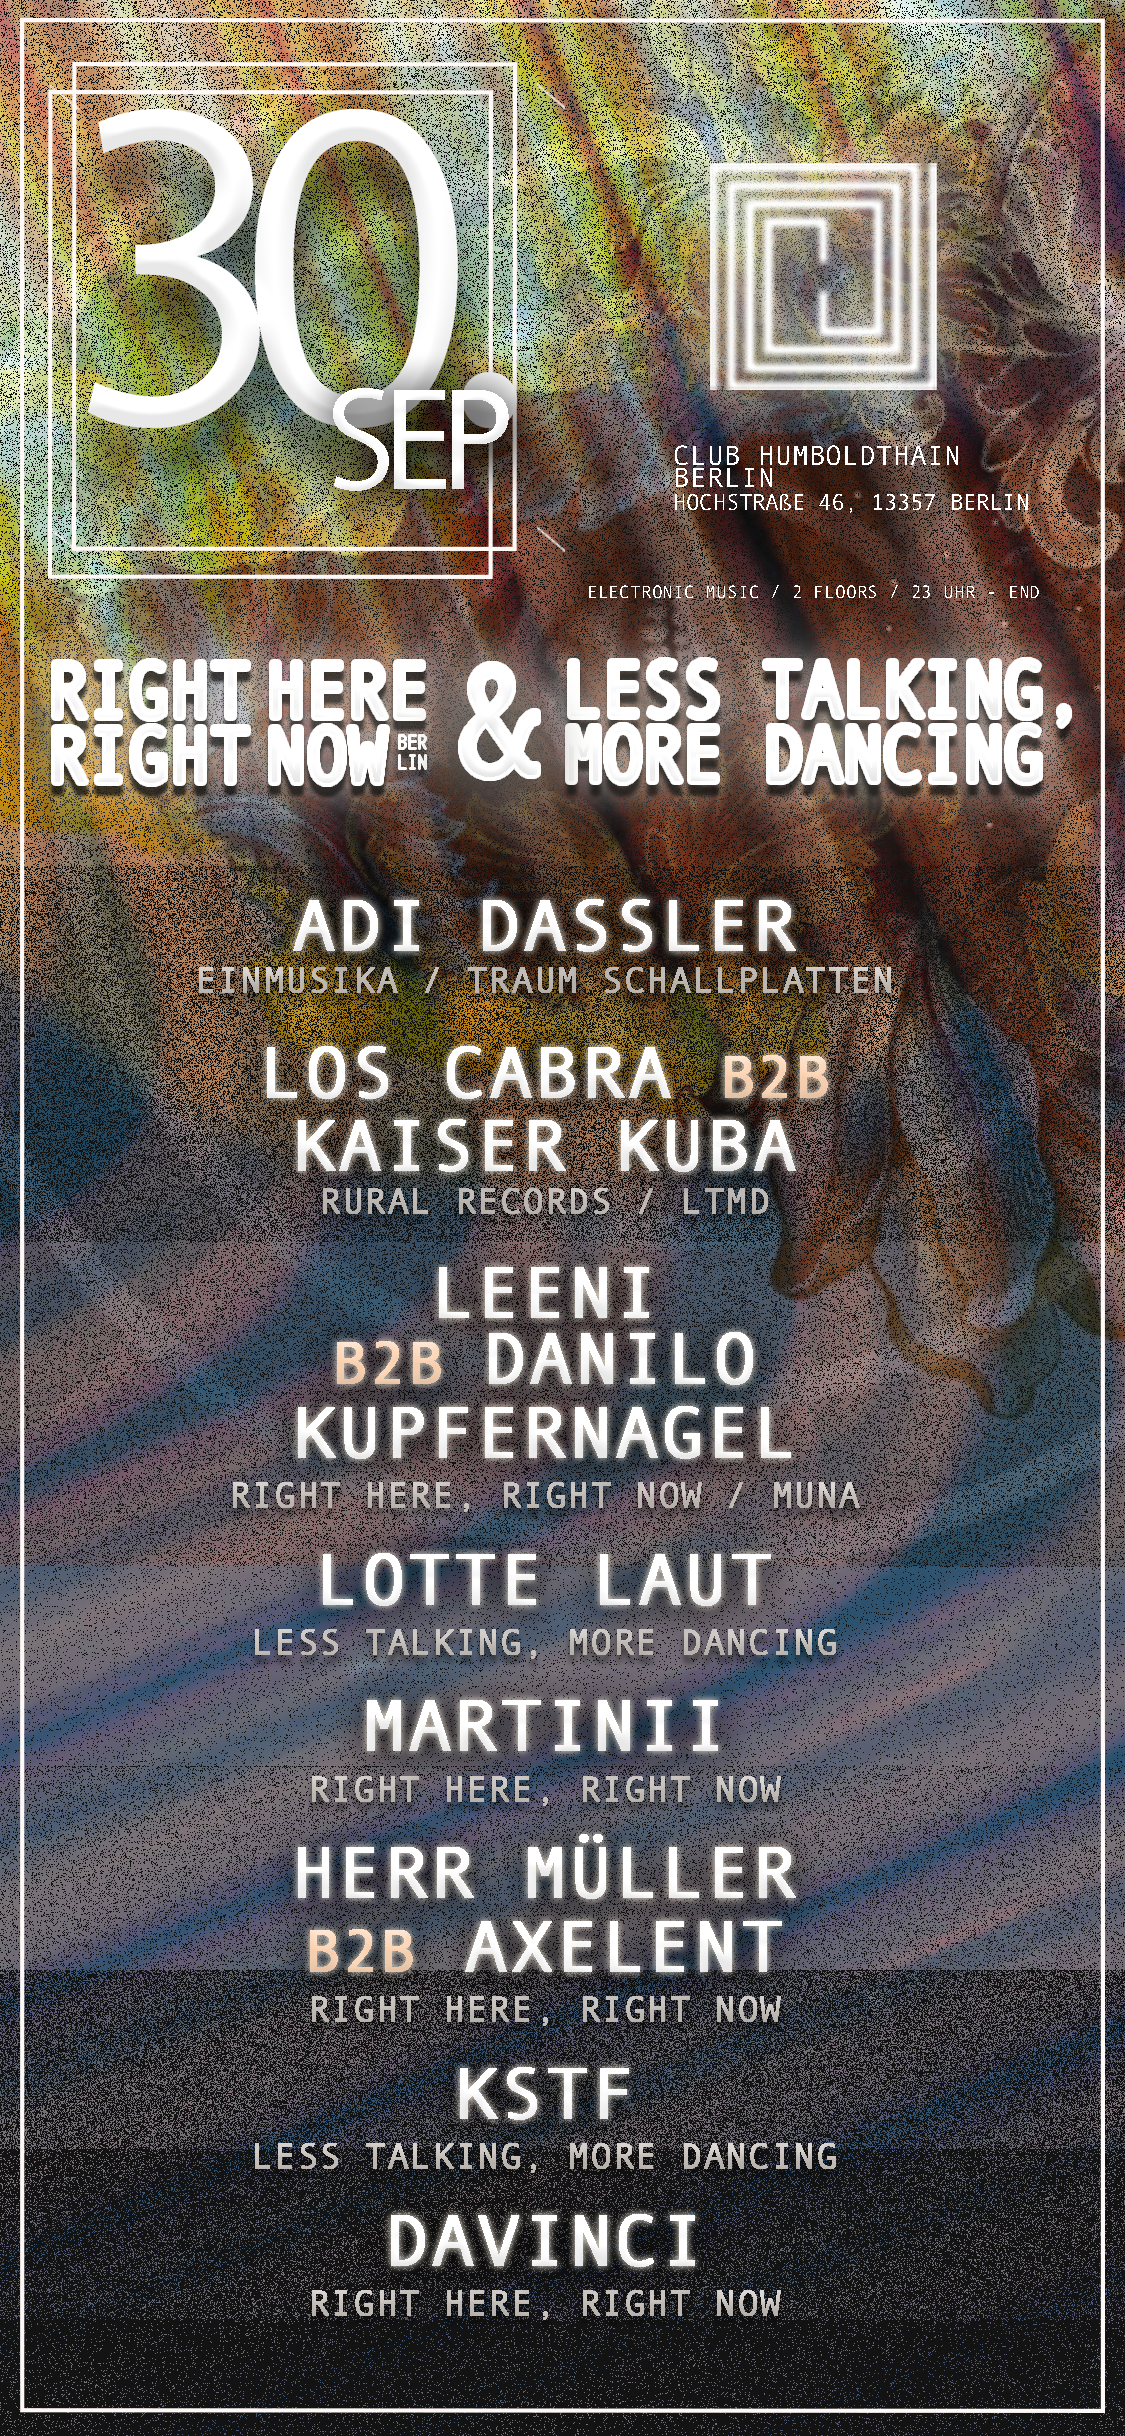 Right here, right now meets Less talking dancing - Flyer back